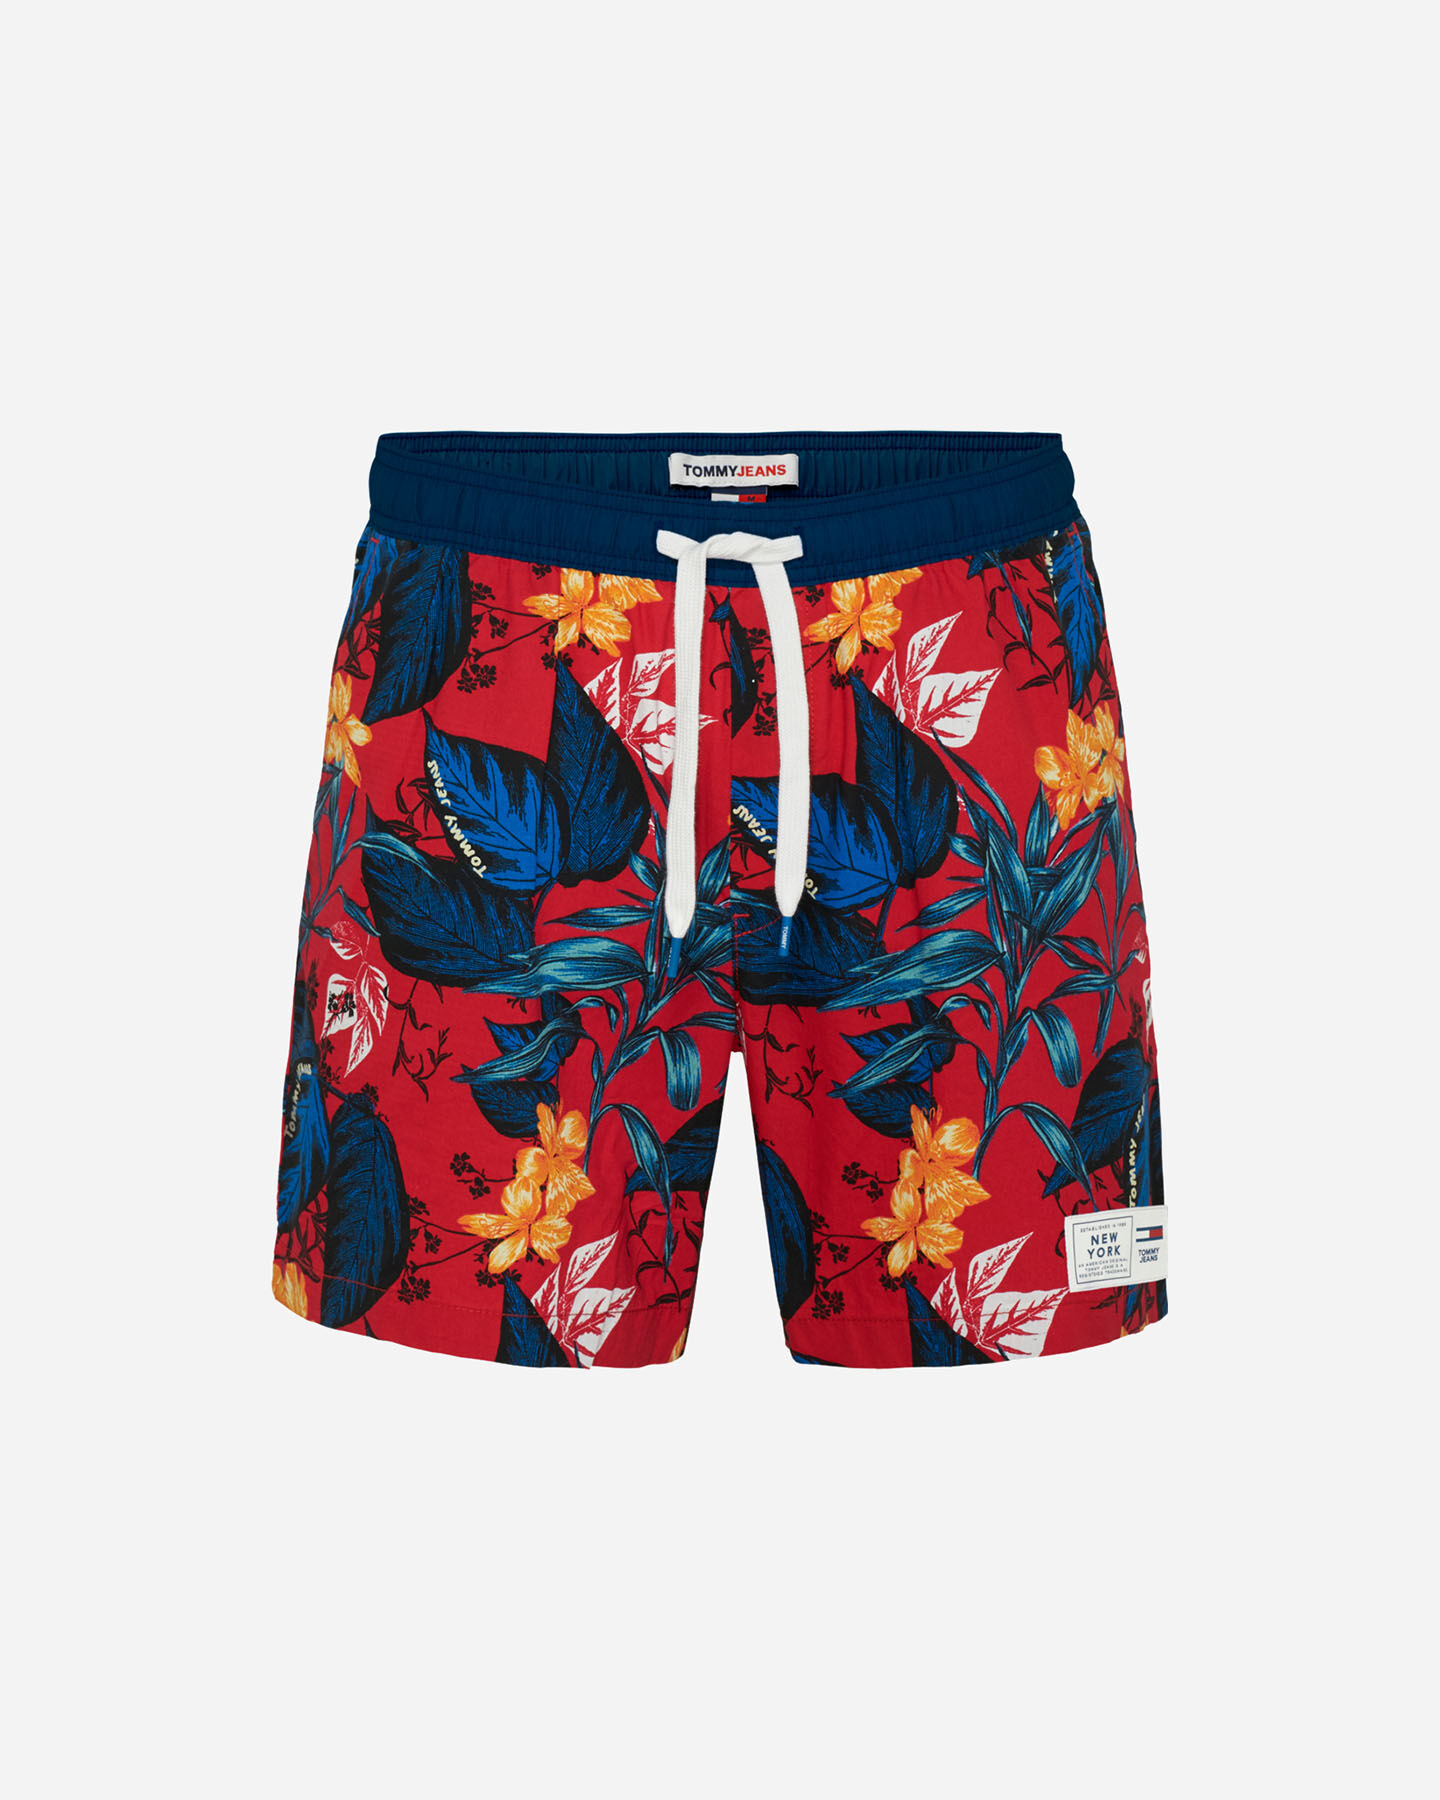  Bermuda TOMMY HILFIGER TROPICAL PRINT M S4105020|0KR|S scatto 0